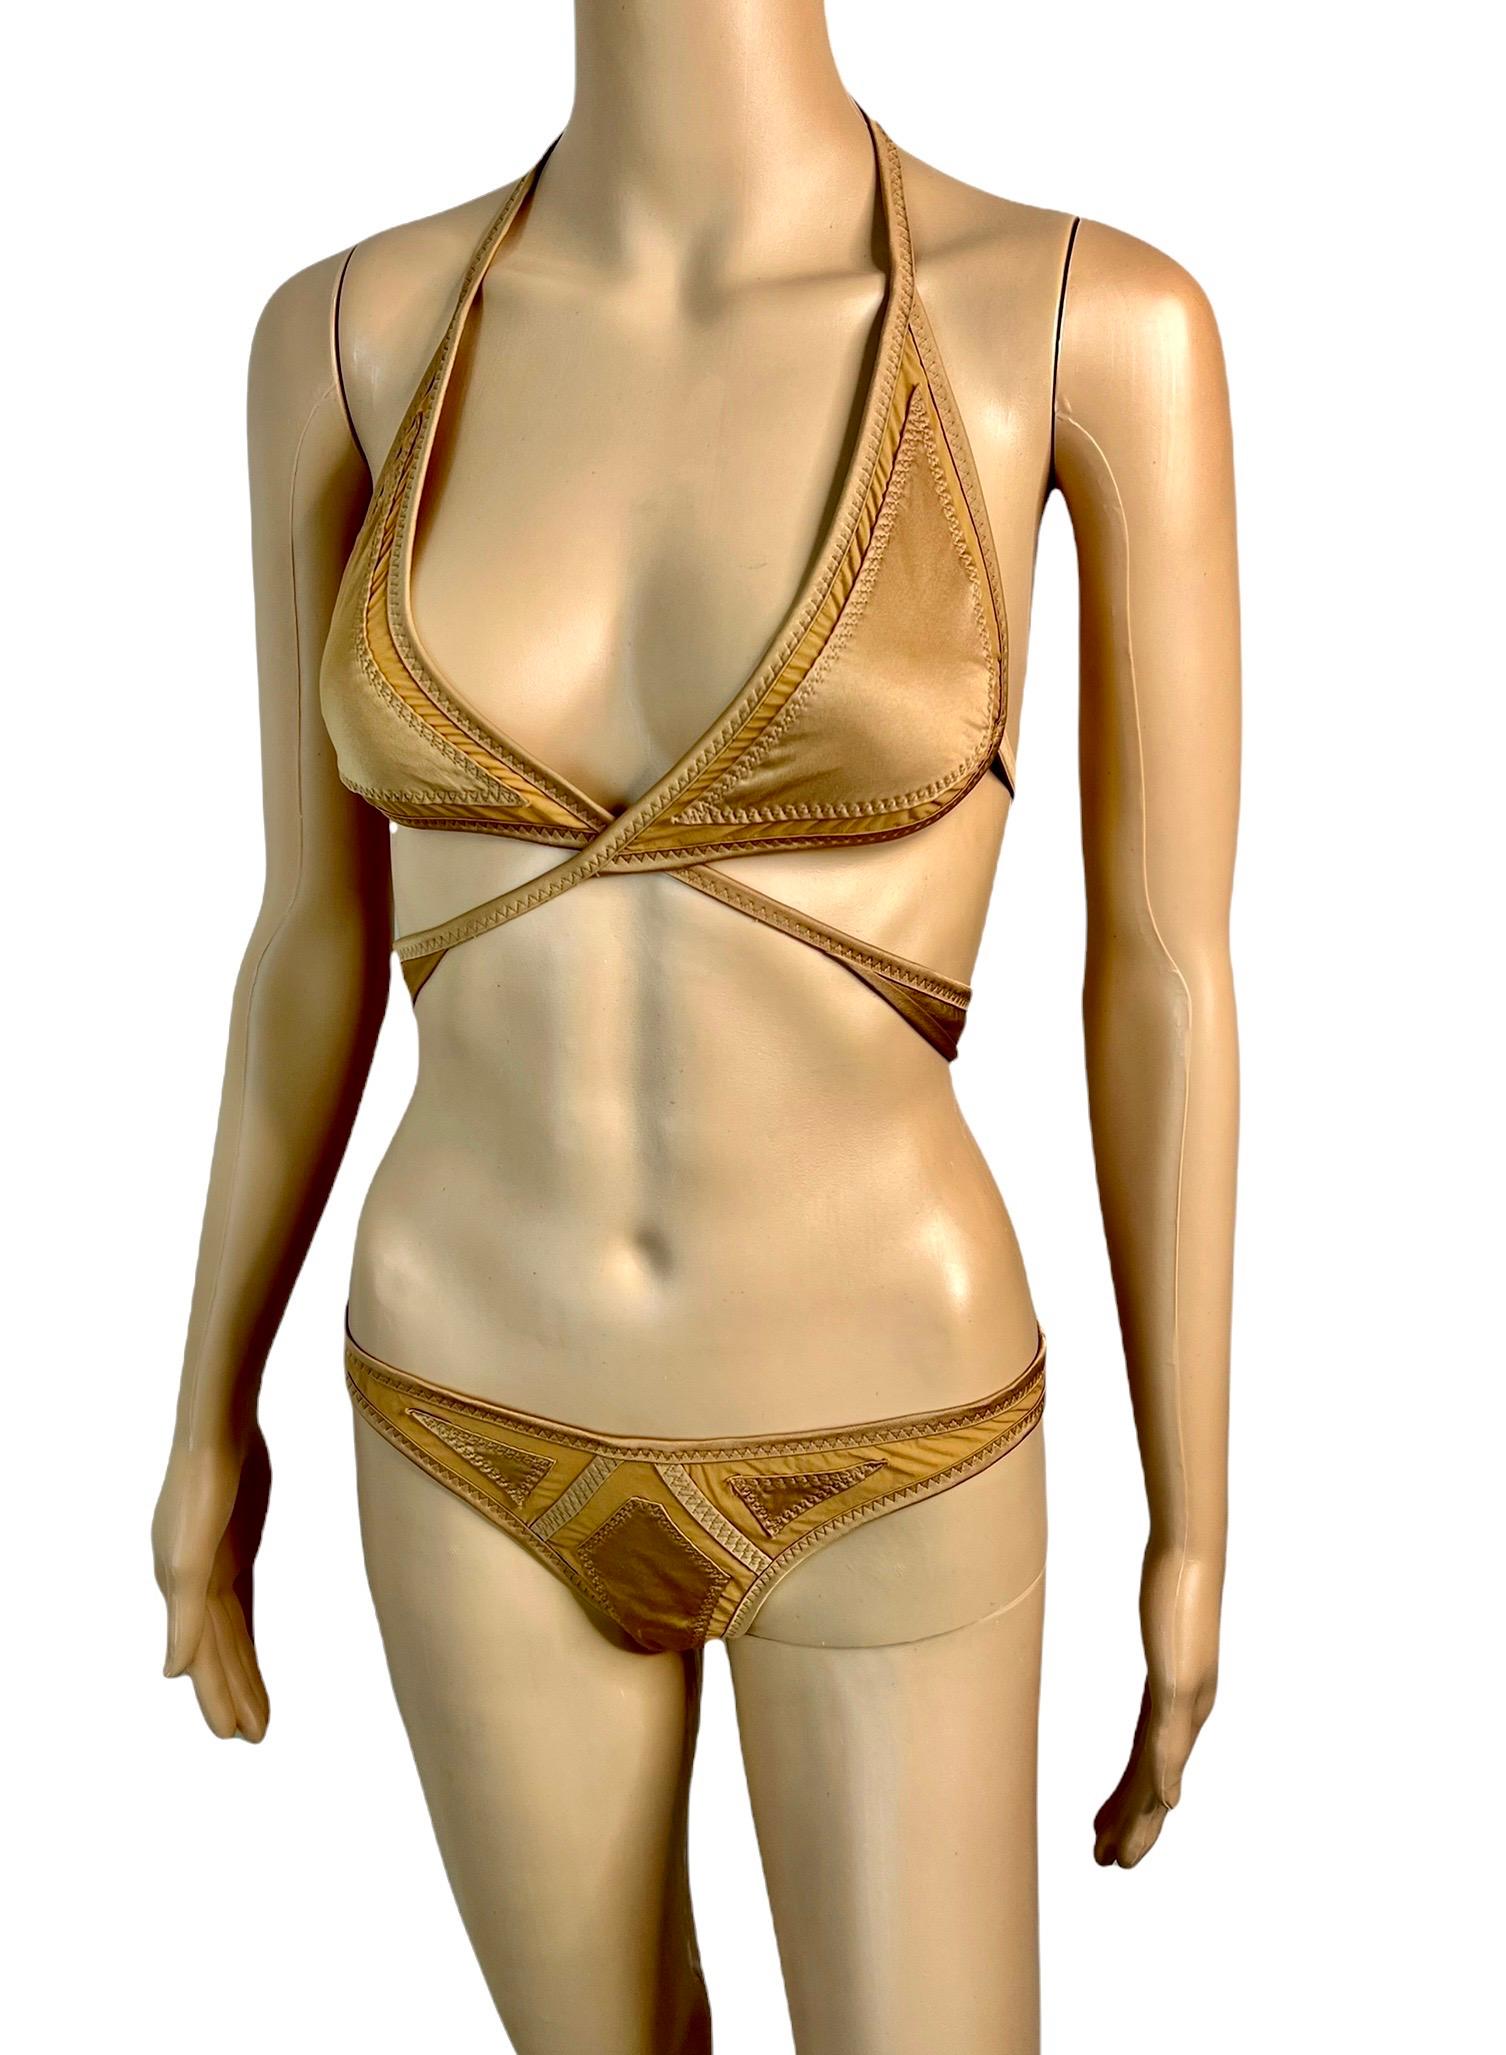 Gucci S/S 2005 Runway Cutout Sheer Panels Two-Piece Bikini Swimsuit Swimwear Size M

Look 27 from the Spring 2005 Collection.

Excellent Condition